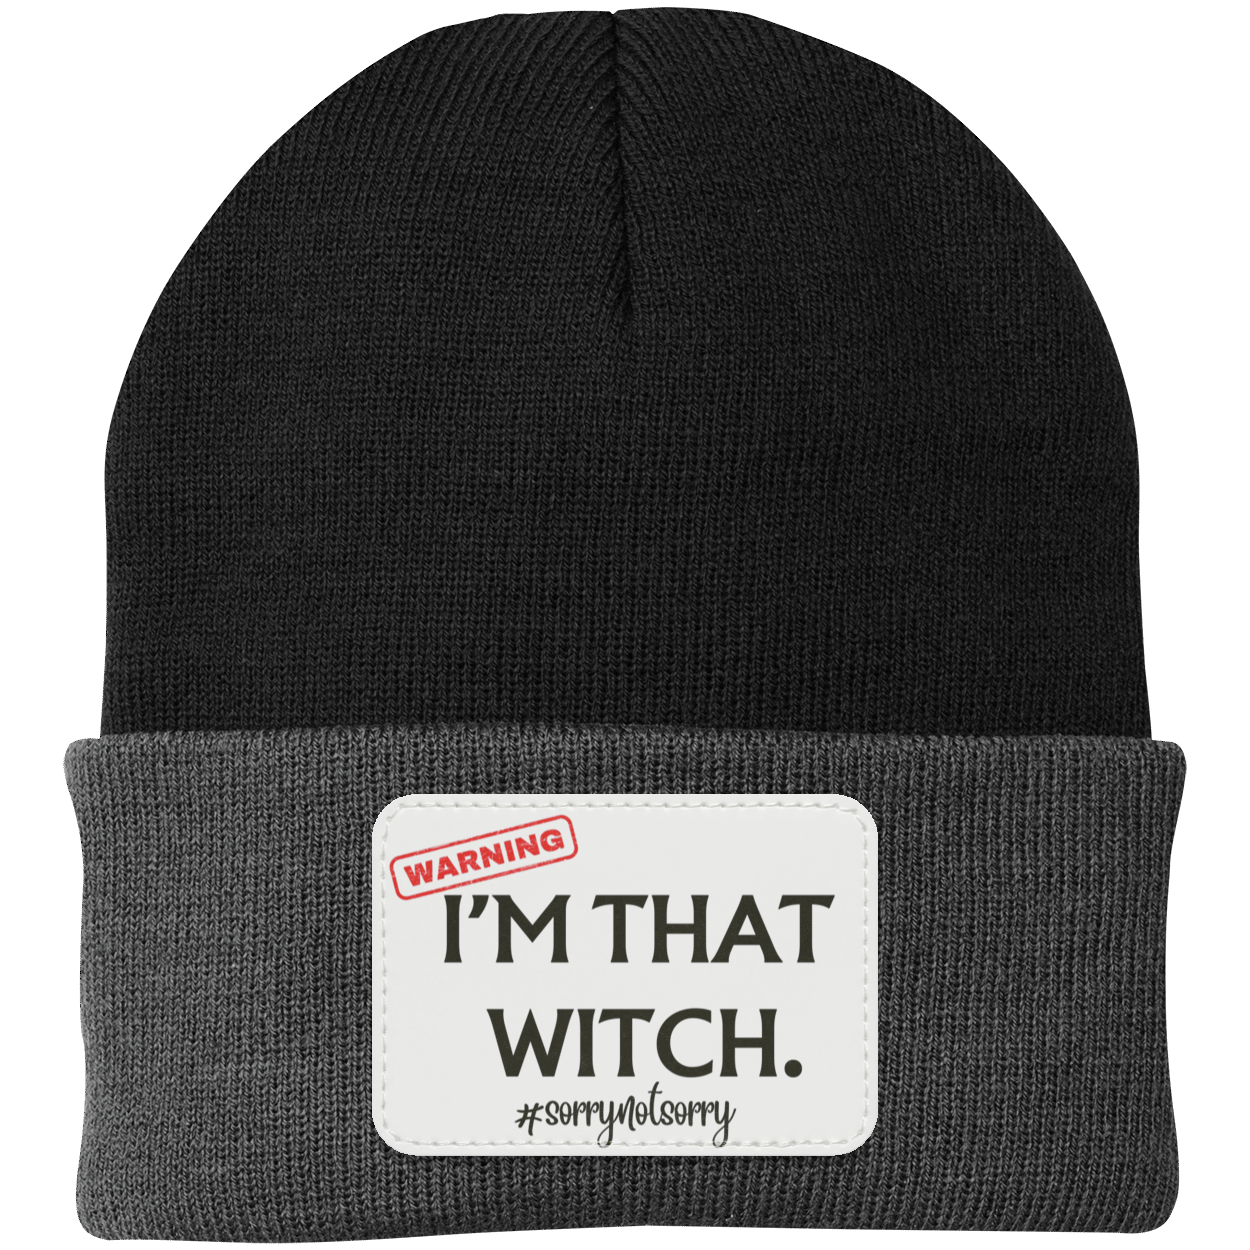 I’M THAT WITCH.  Knit Cap - Patch